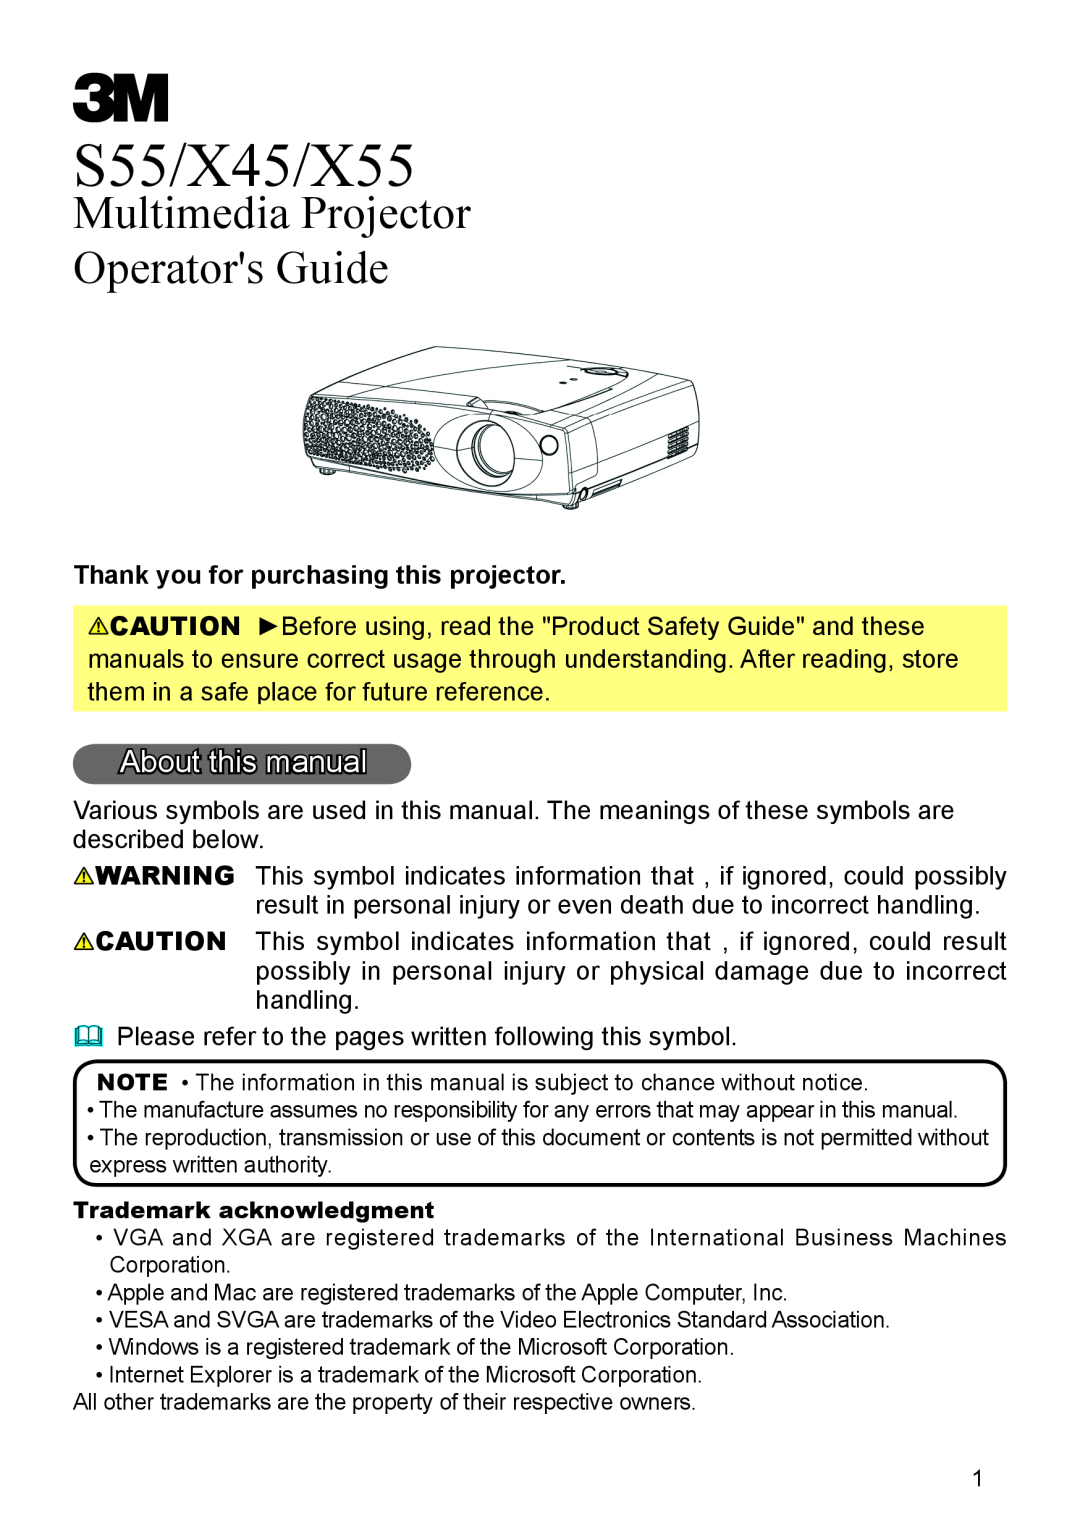 3M manual S55/X45/X55 Multimedia Projector, Product Safety Guide 